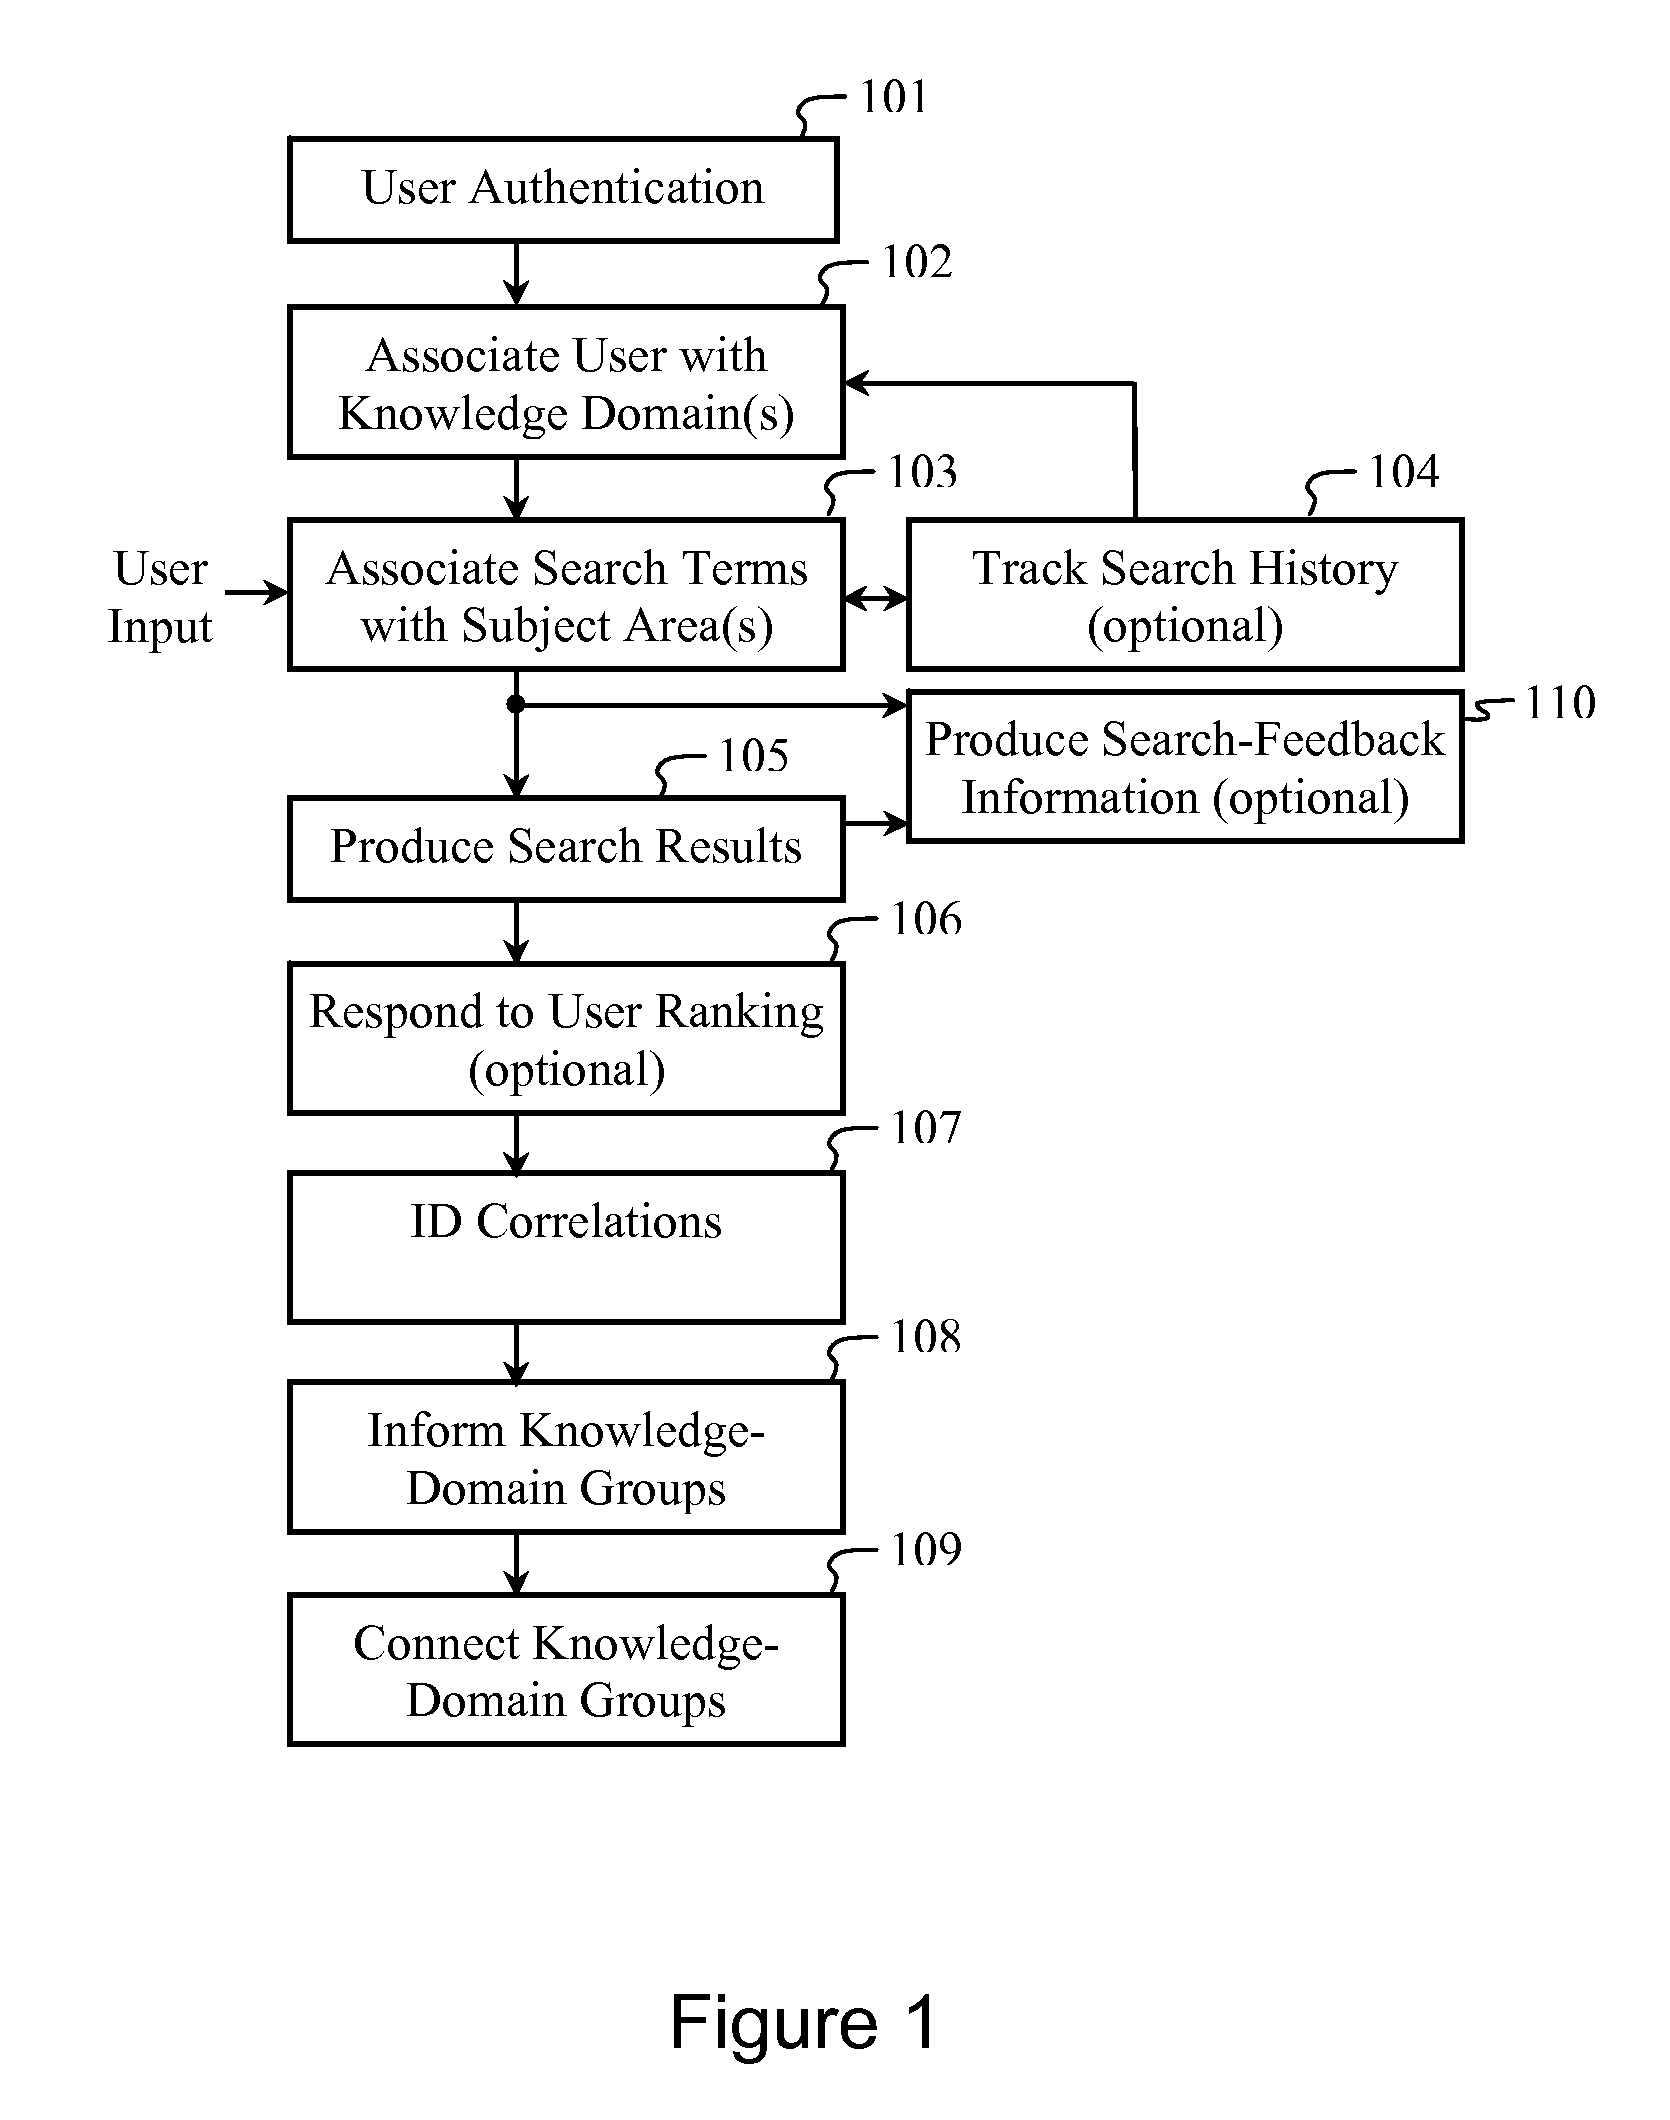 System and Method for Performing Frictionless Collaboration for Criteria Search